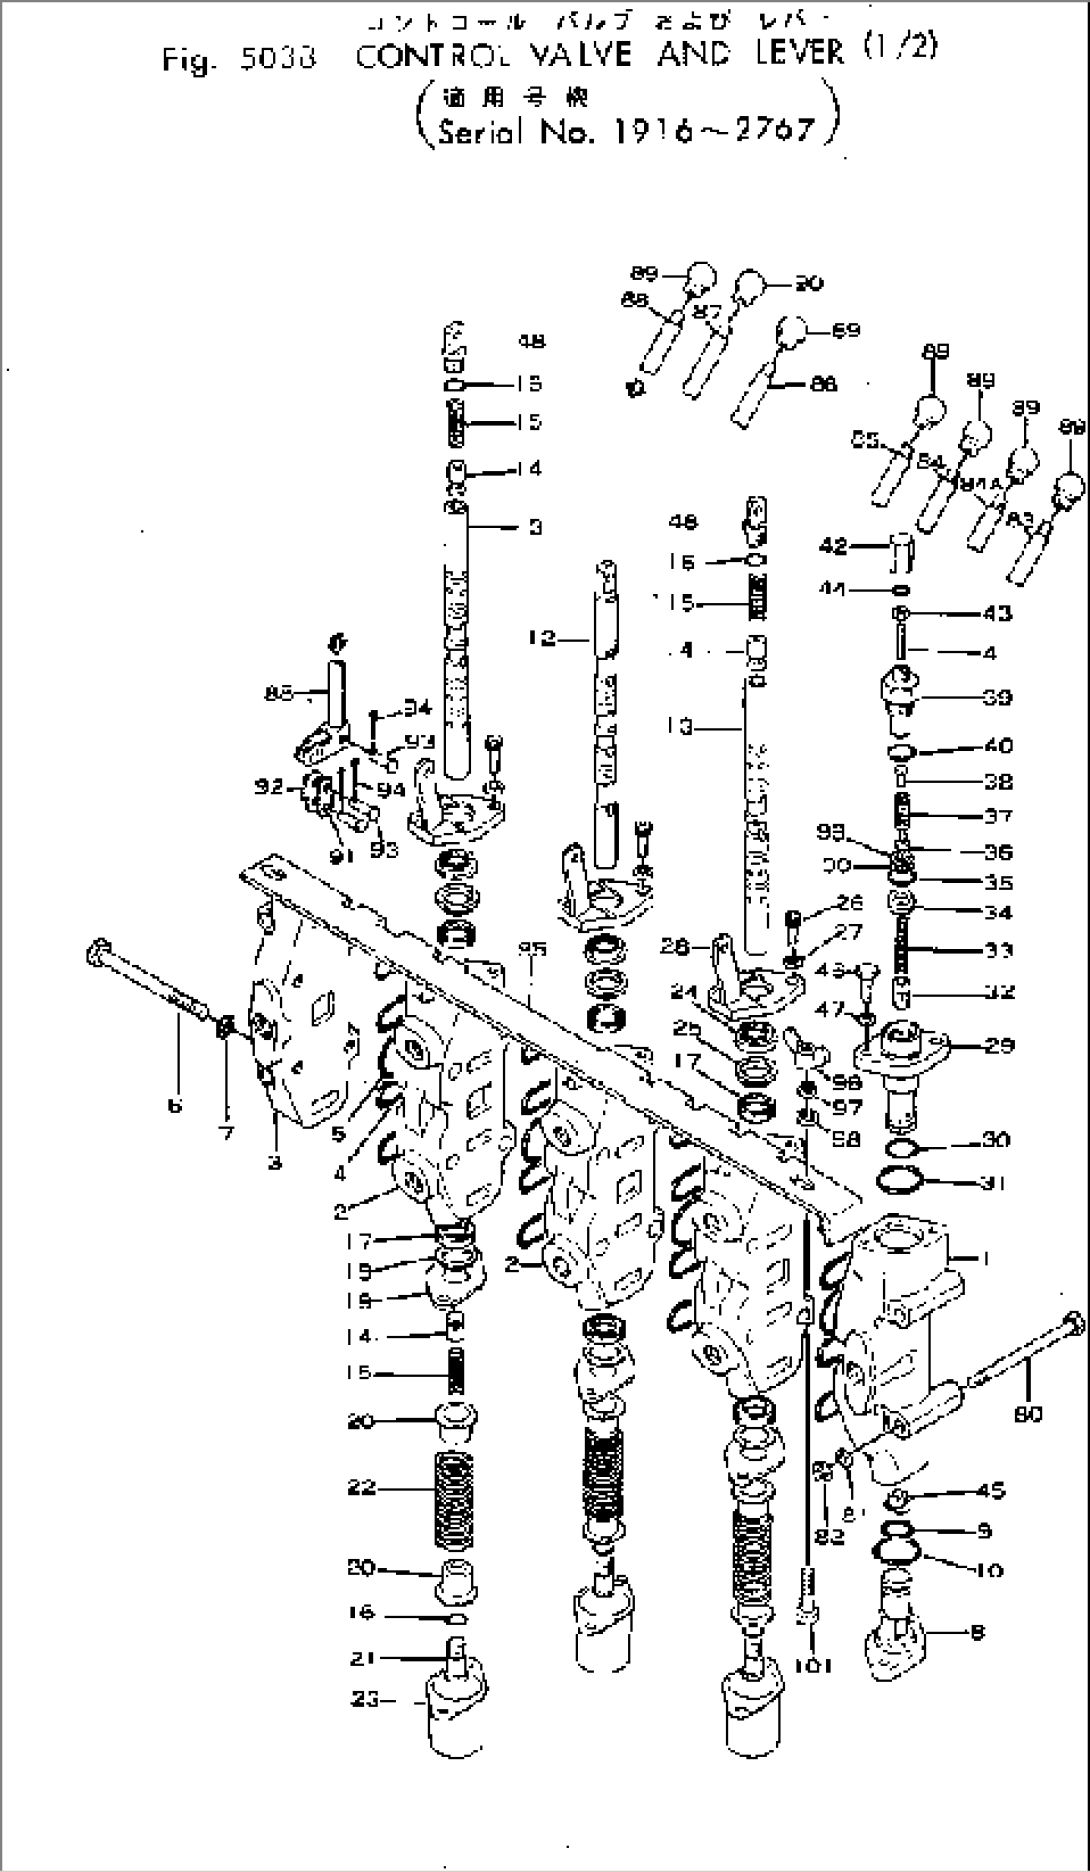 CONTROL VALVE AND LEVER (1/2)(#1916-2767)